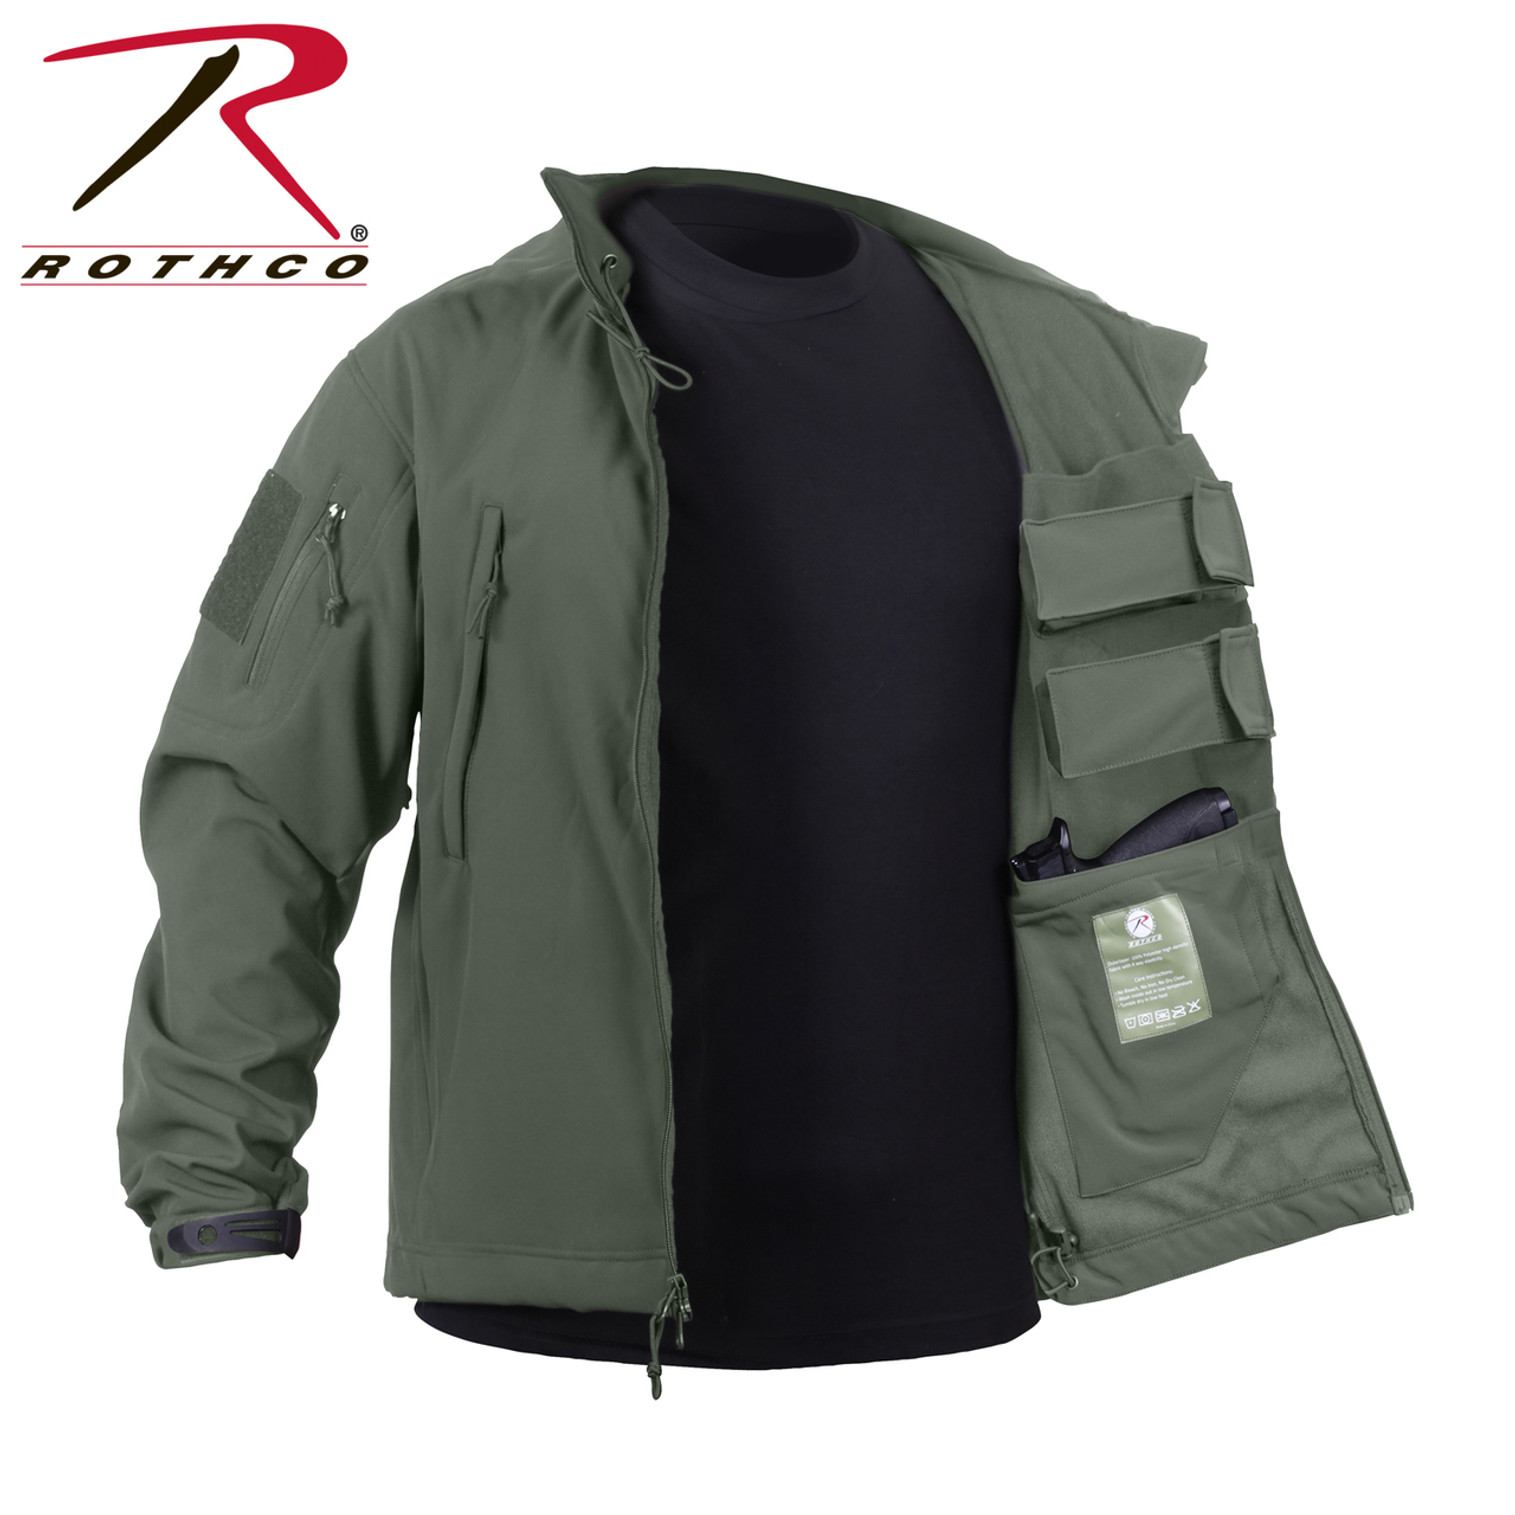 Rothco Concealed Carry Soft Shell Jacket - Olive Drab